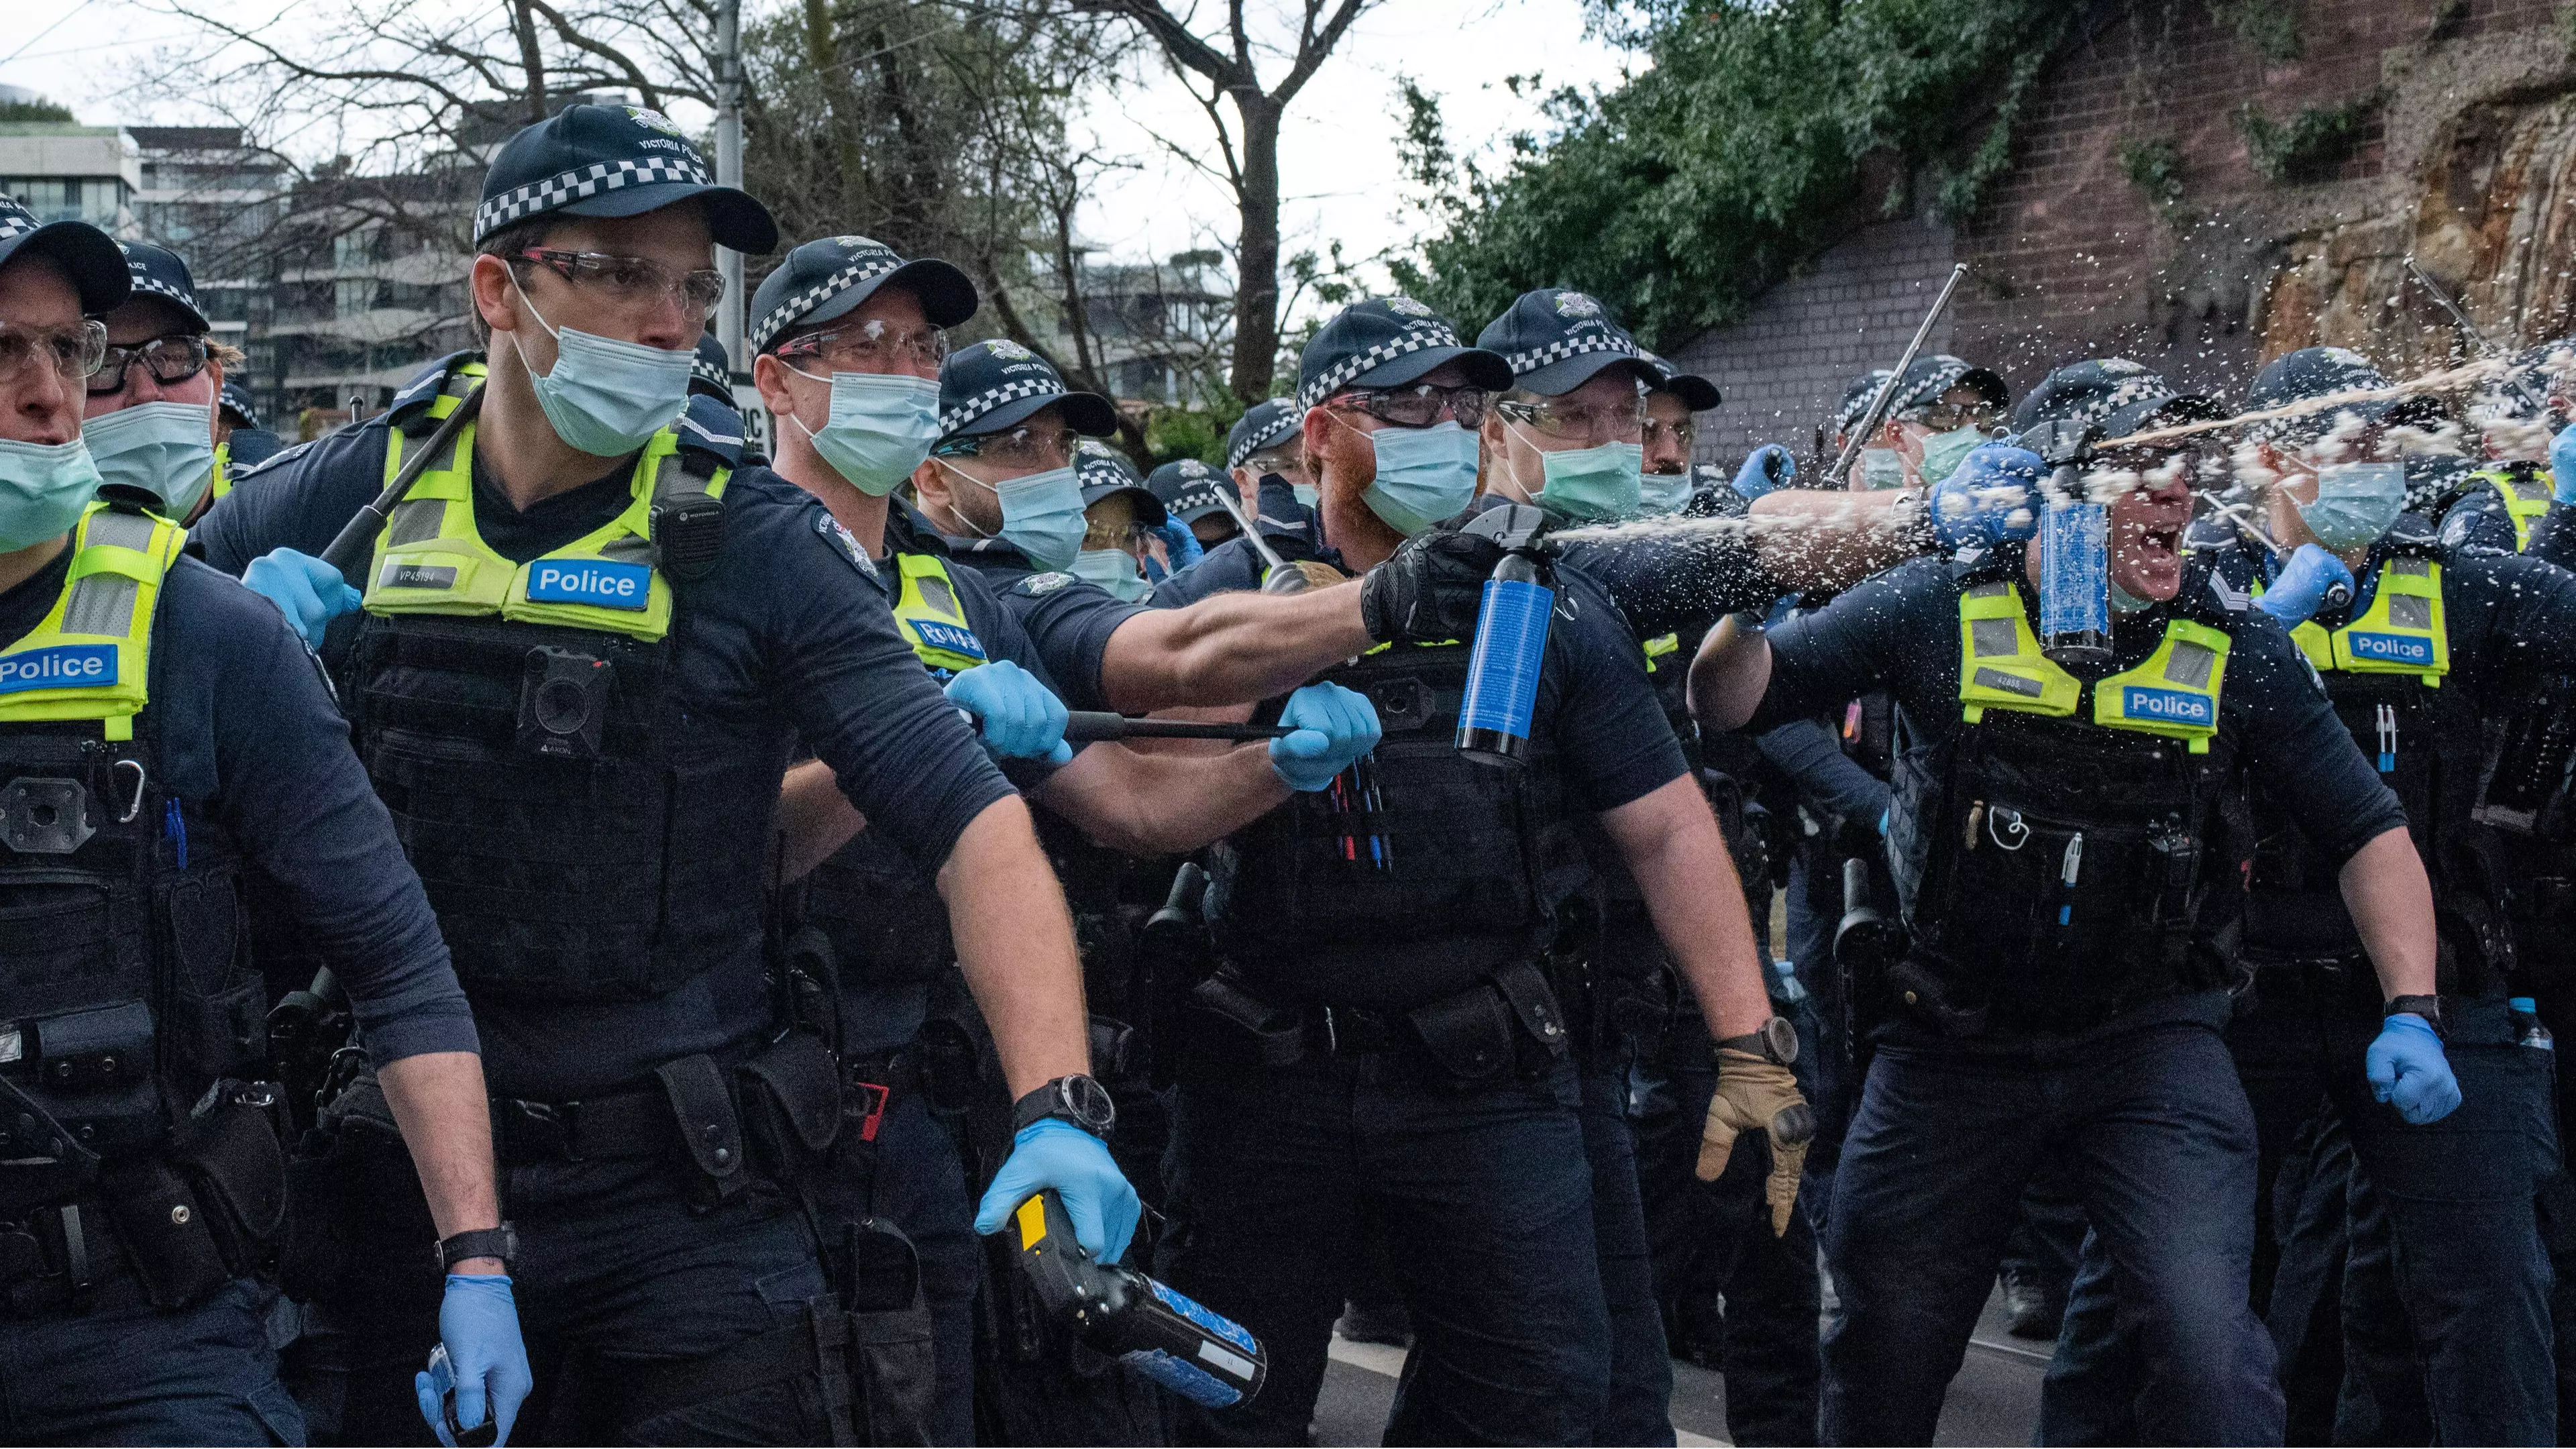 Victoria Police Under Fire After Anti-Lockdown Protestor Gets Capsicum Sprayed In The Face